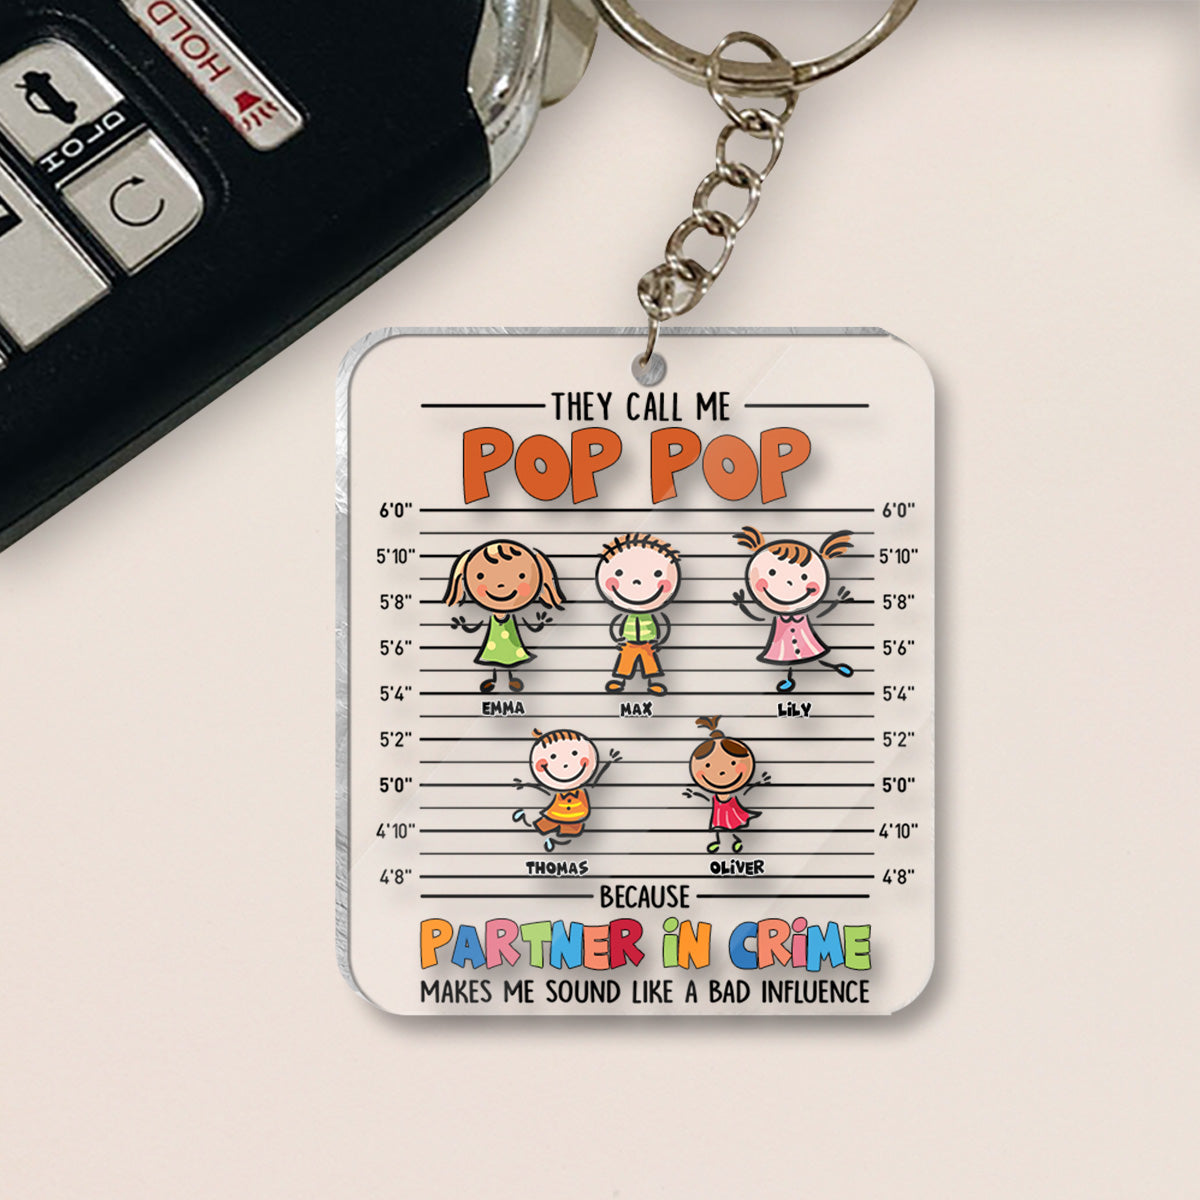 Partner In Crime - Gift for grandpa, grandma, mom, dad, uncle, aunt, brother, sister - Personalized Keychain